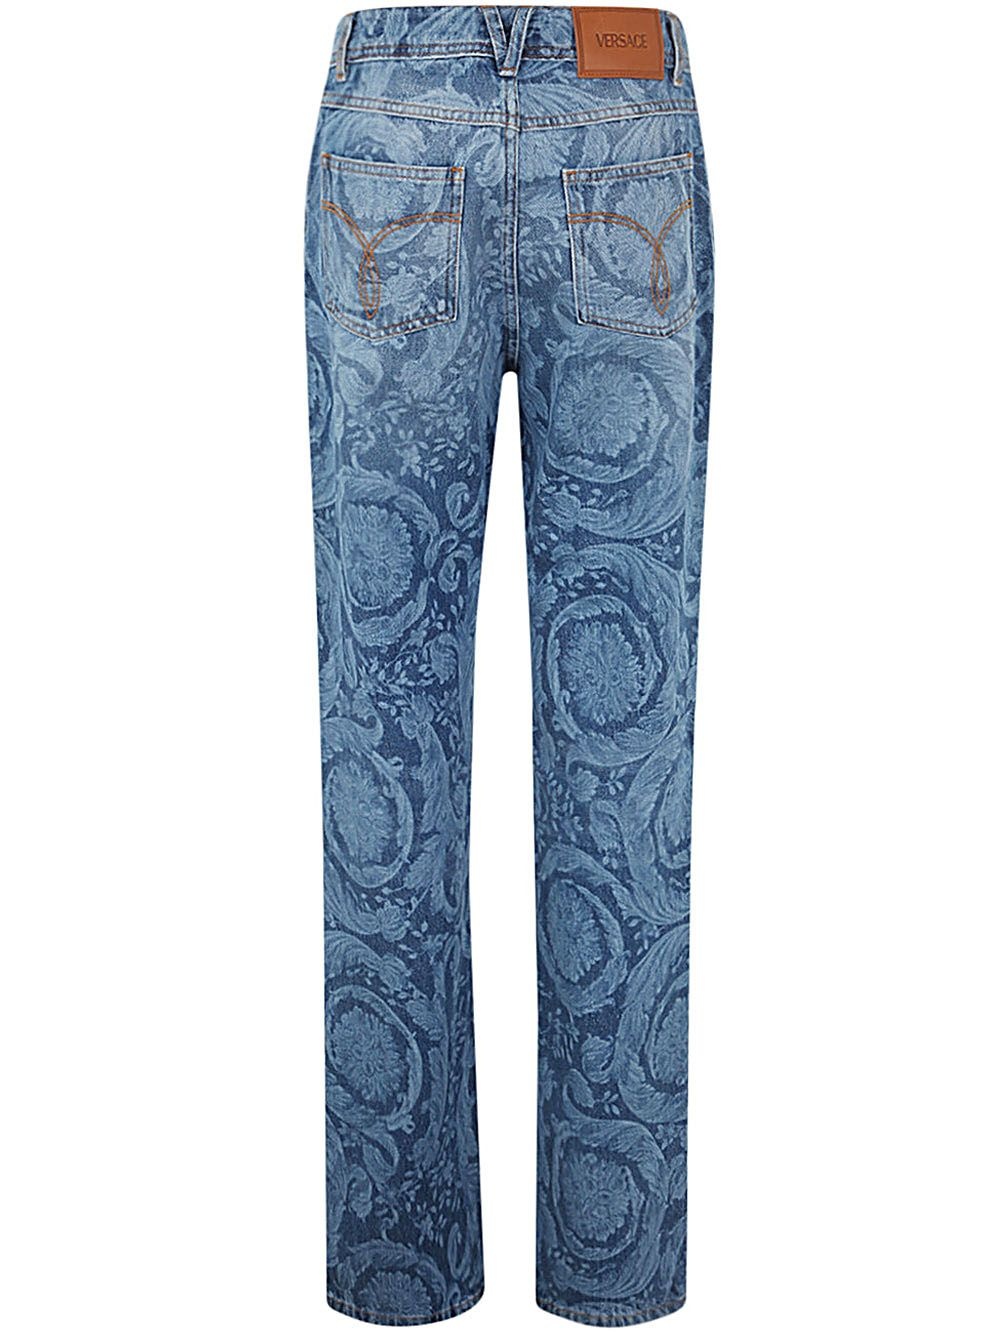 PANT DENIM LASER STONE WASH BAROQUE SERIES DENIM FABRIC WITH SPECIAL TREATMENT - 2